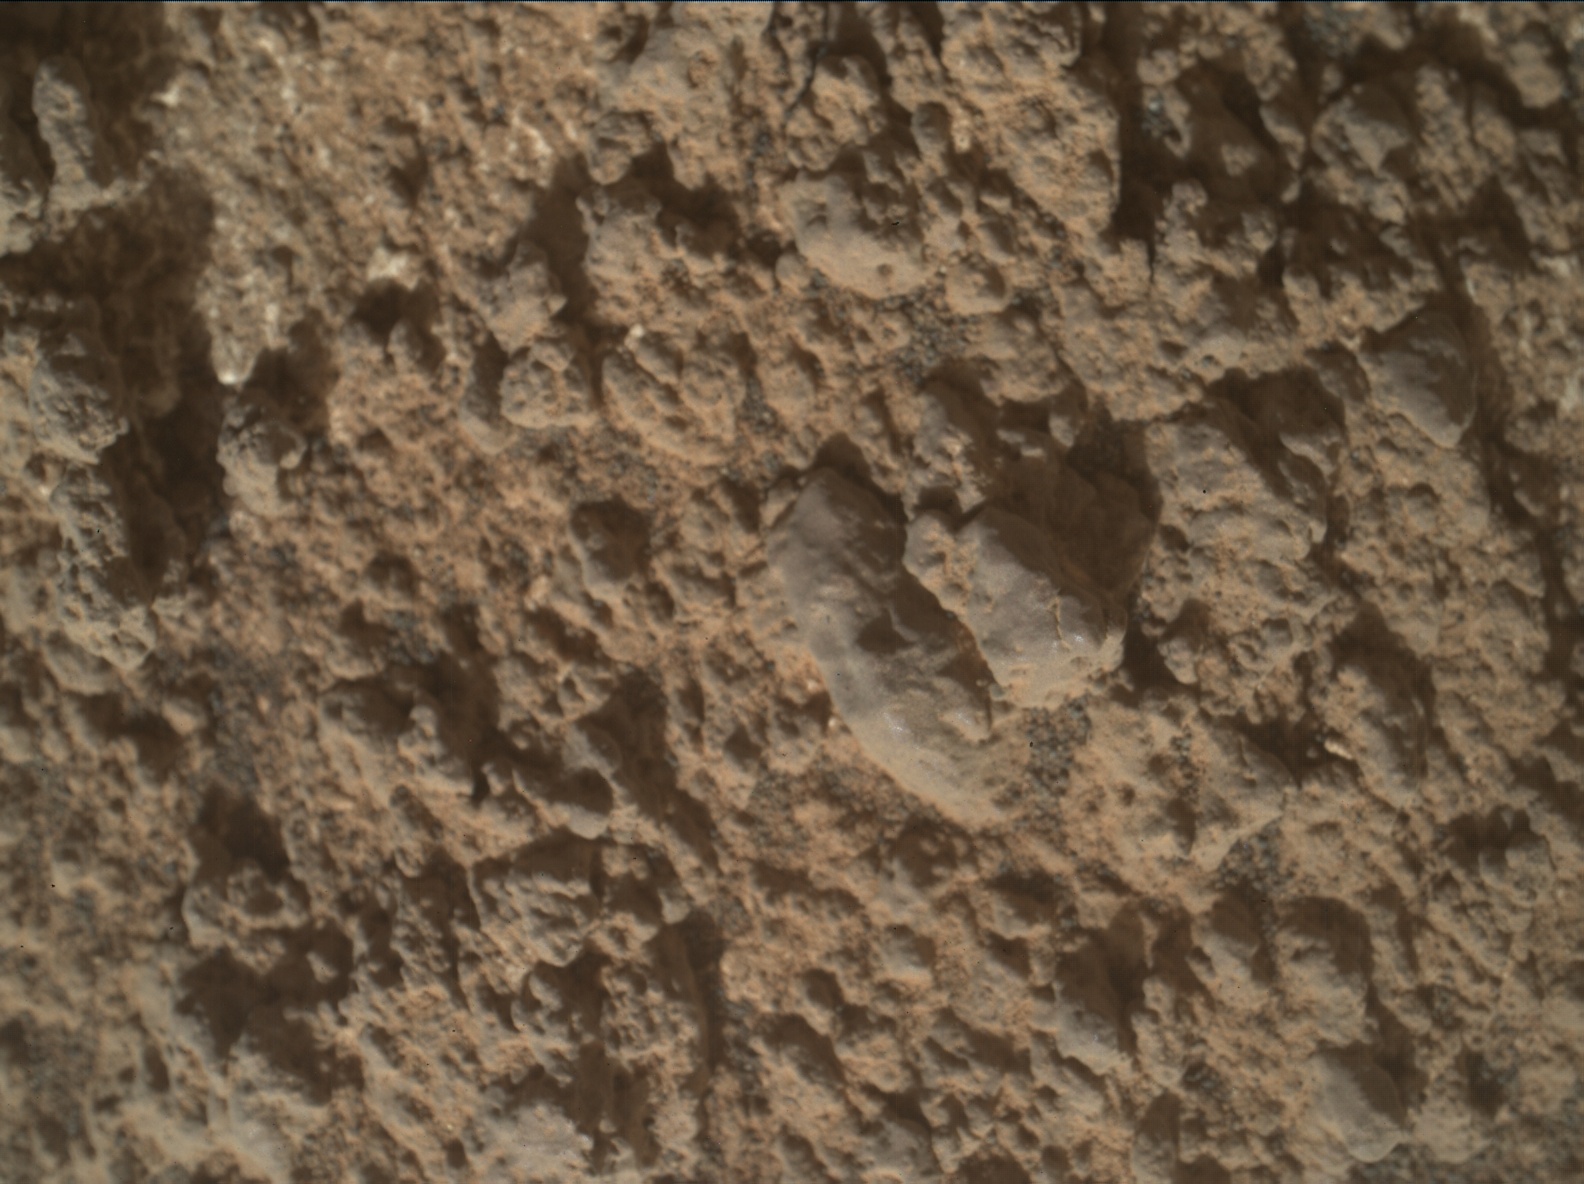 Nasa's Mars rover Curiosity acquired this image using its Mars Hand Lens Imager (MAHLI) on Sol 2928